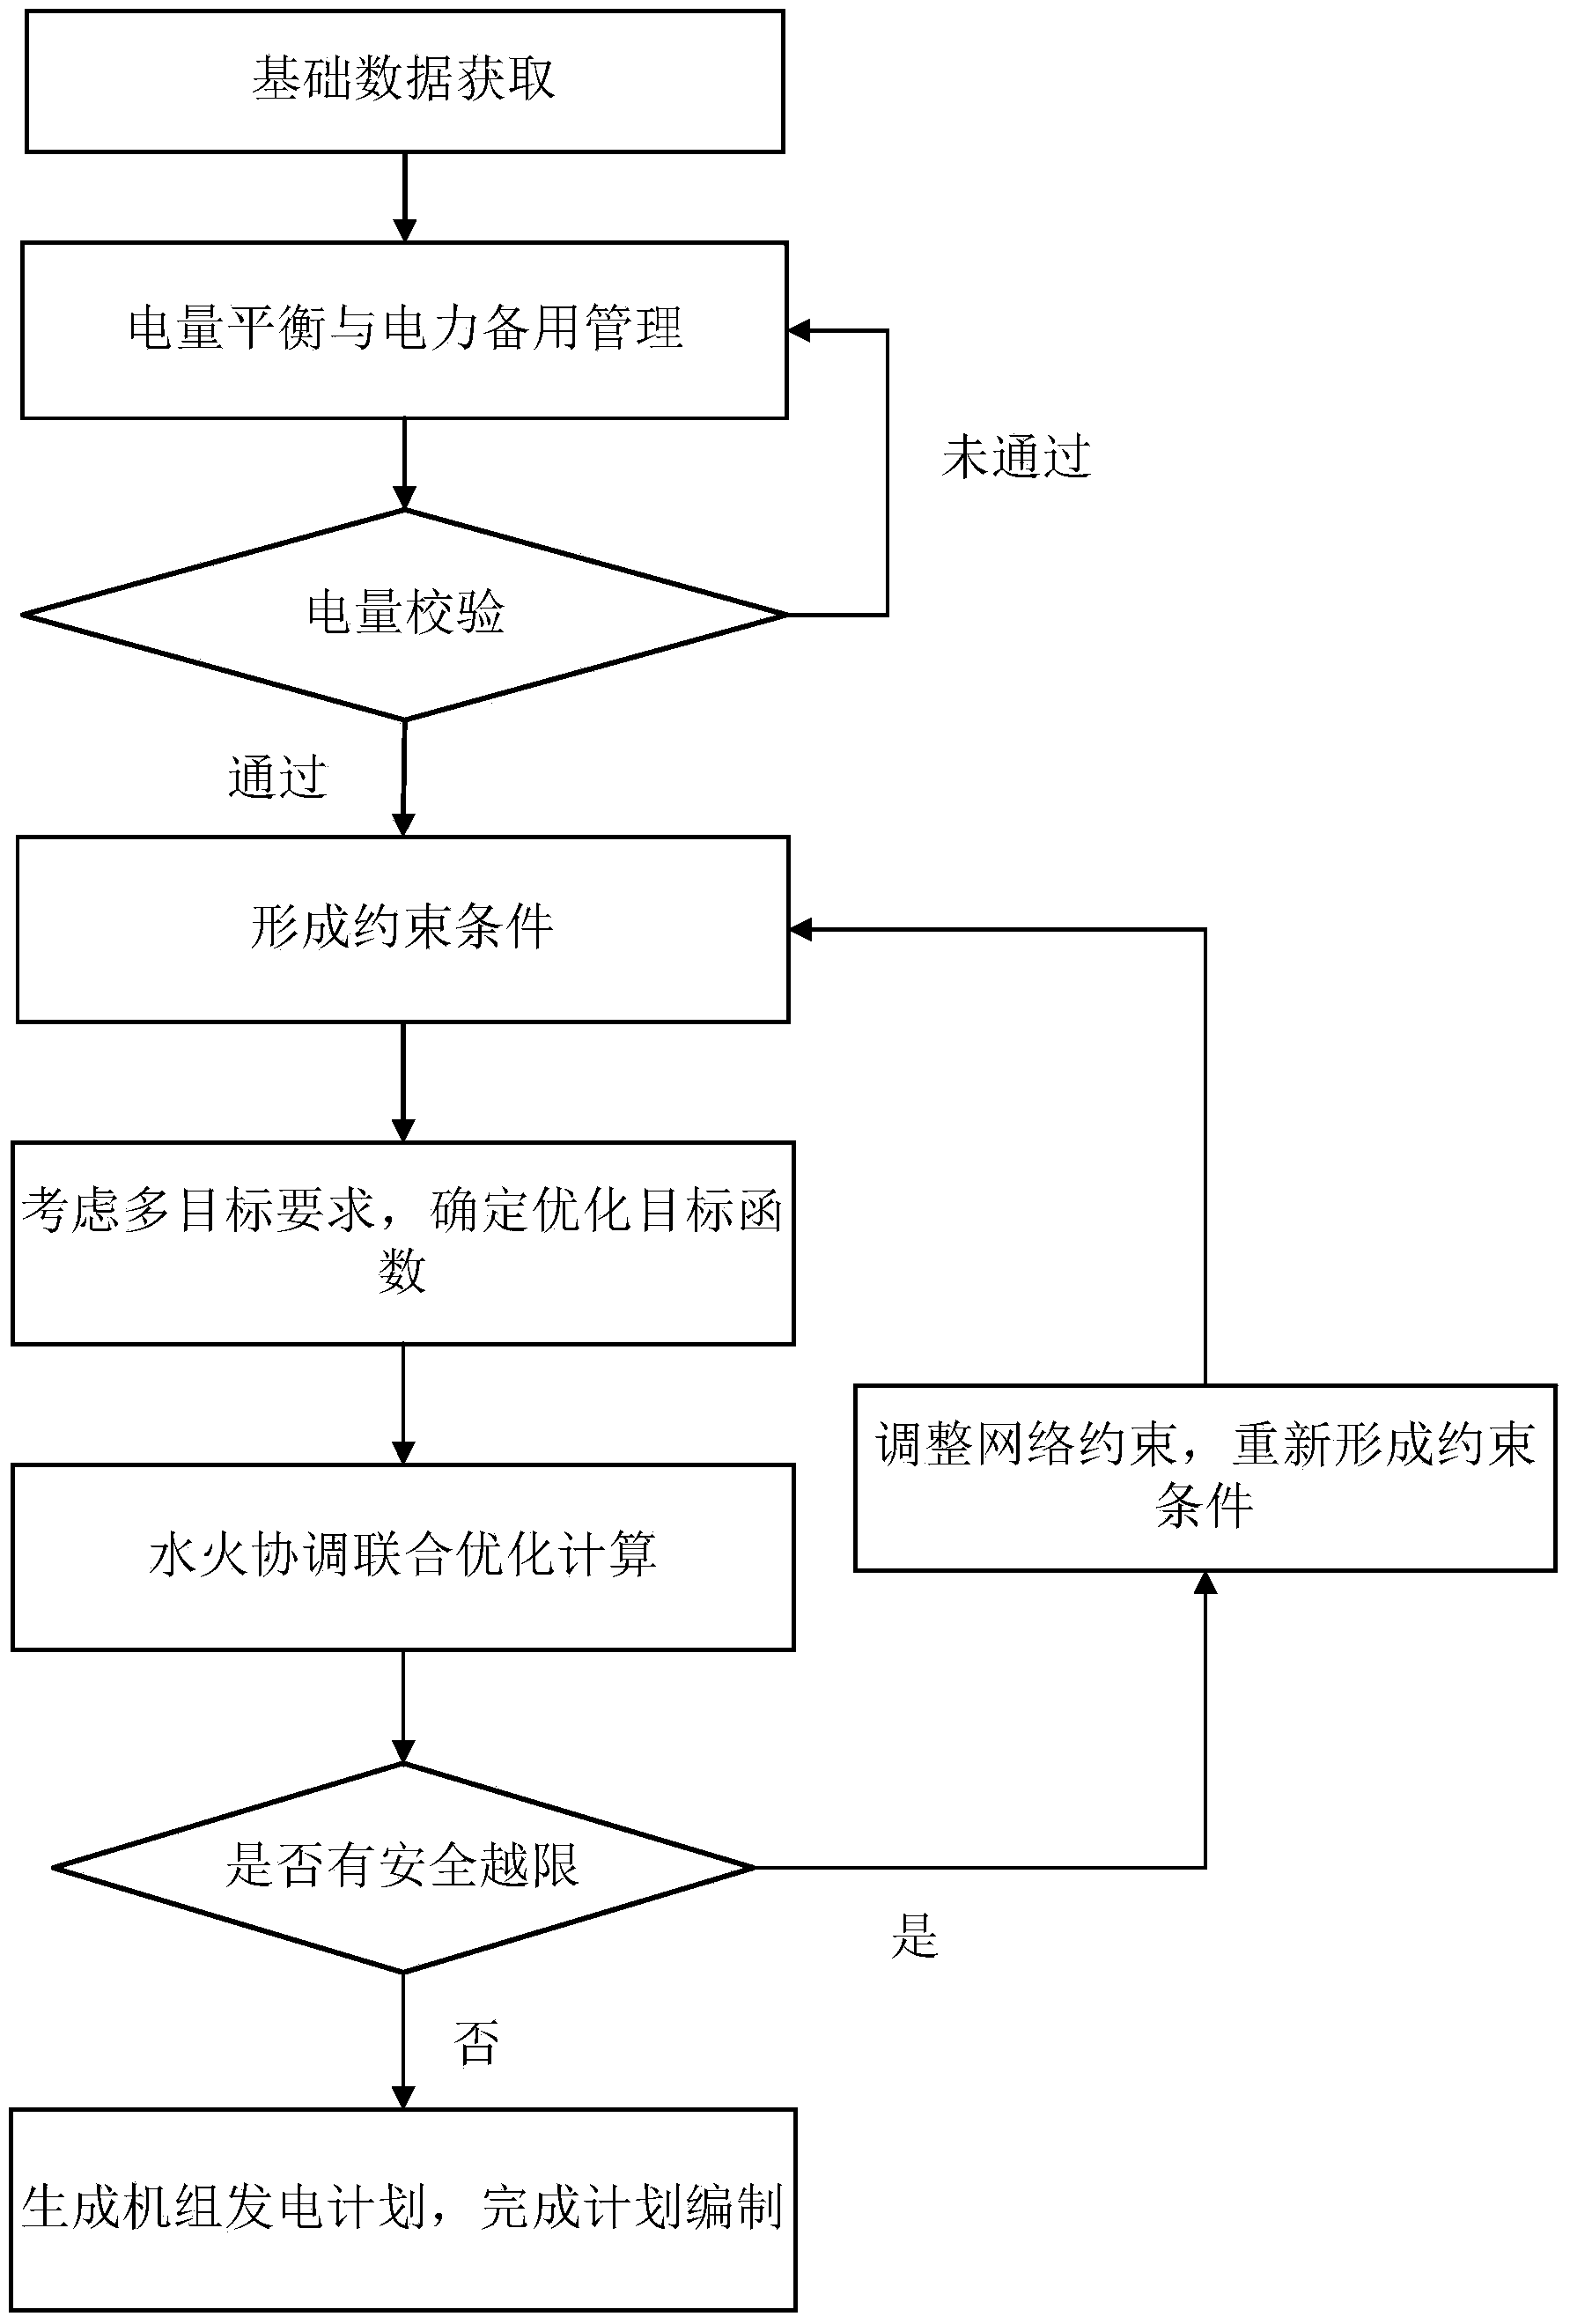 Security constraint generation schedule planning method based on water and fire coordination